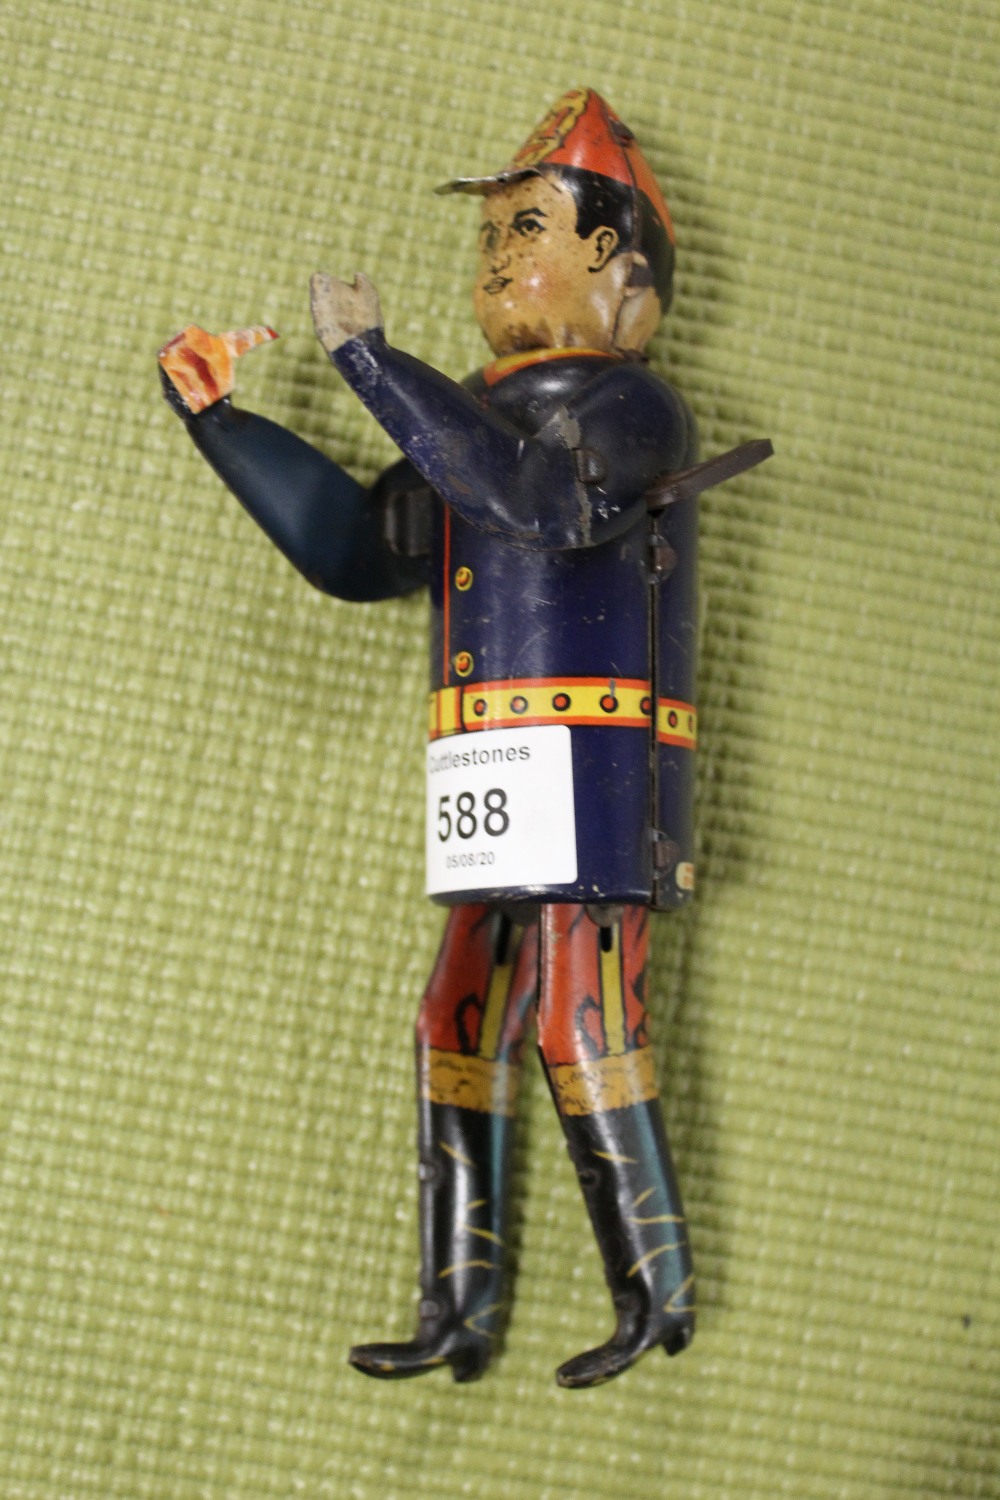 A VINTAGE TIN PLATE WIND-UP FIGURE - POSSIBLY A FIREMAN